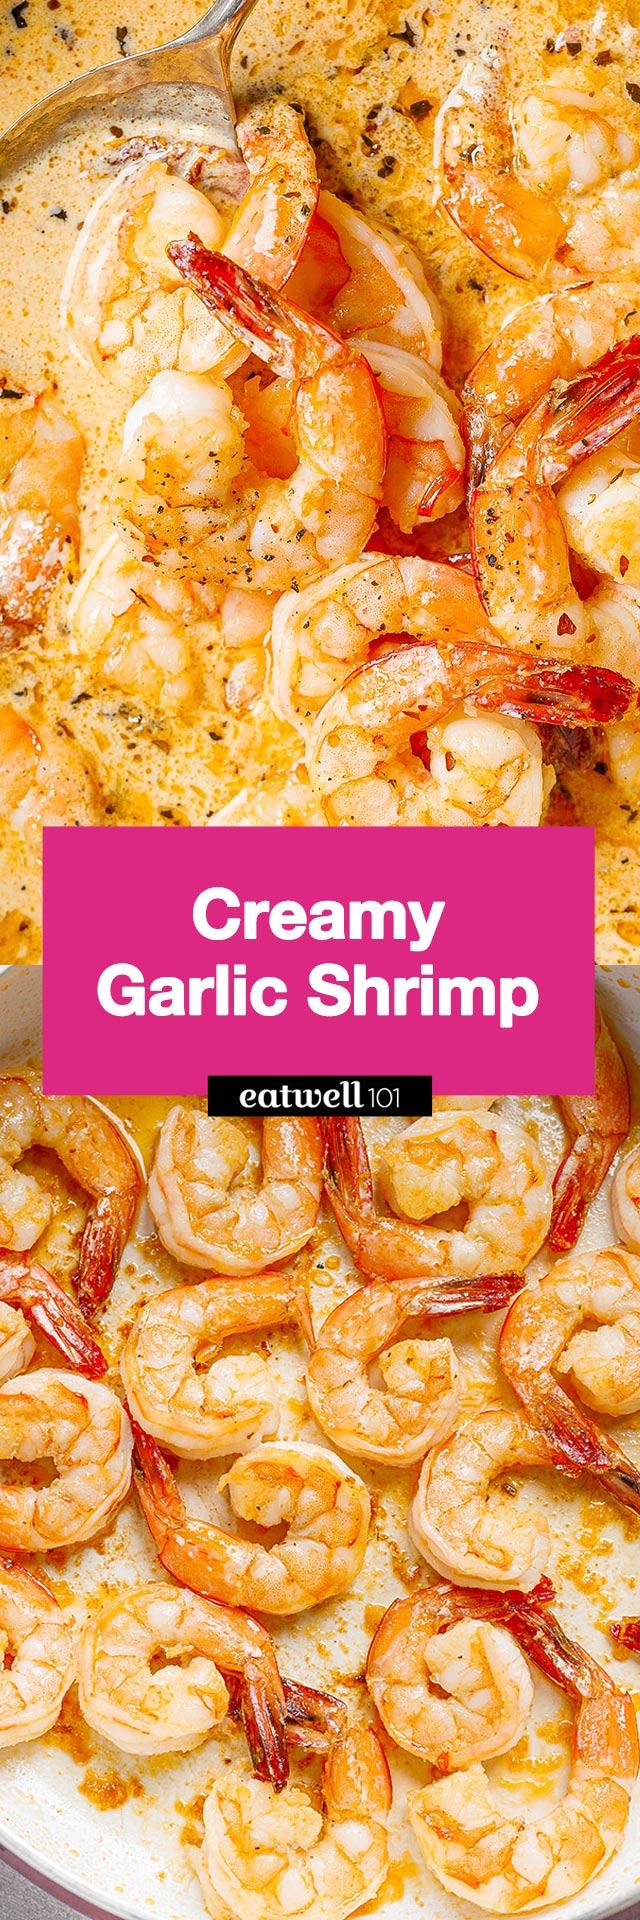 Creamy Garlic Shrimp Recipe with Sundried Tomatoes - #shrimp #recipe #eatwell101 - This quick shrimp dish will become your new favorite way to cook shrimp.